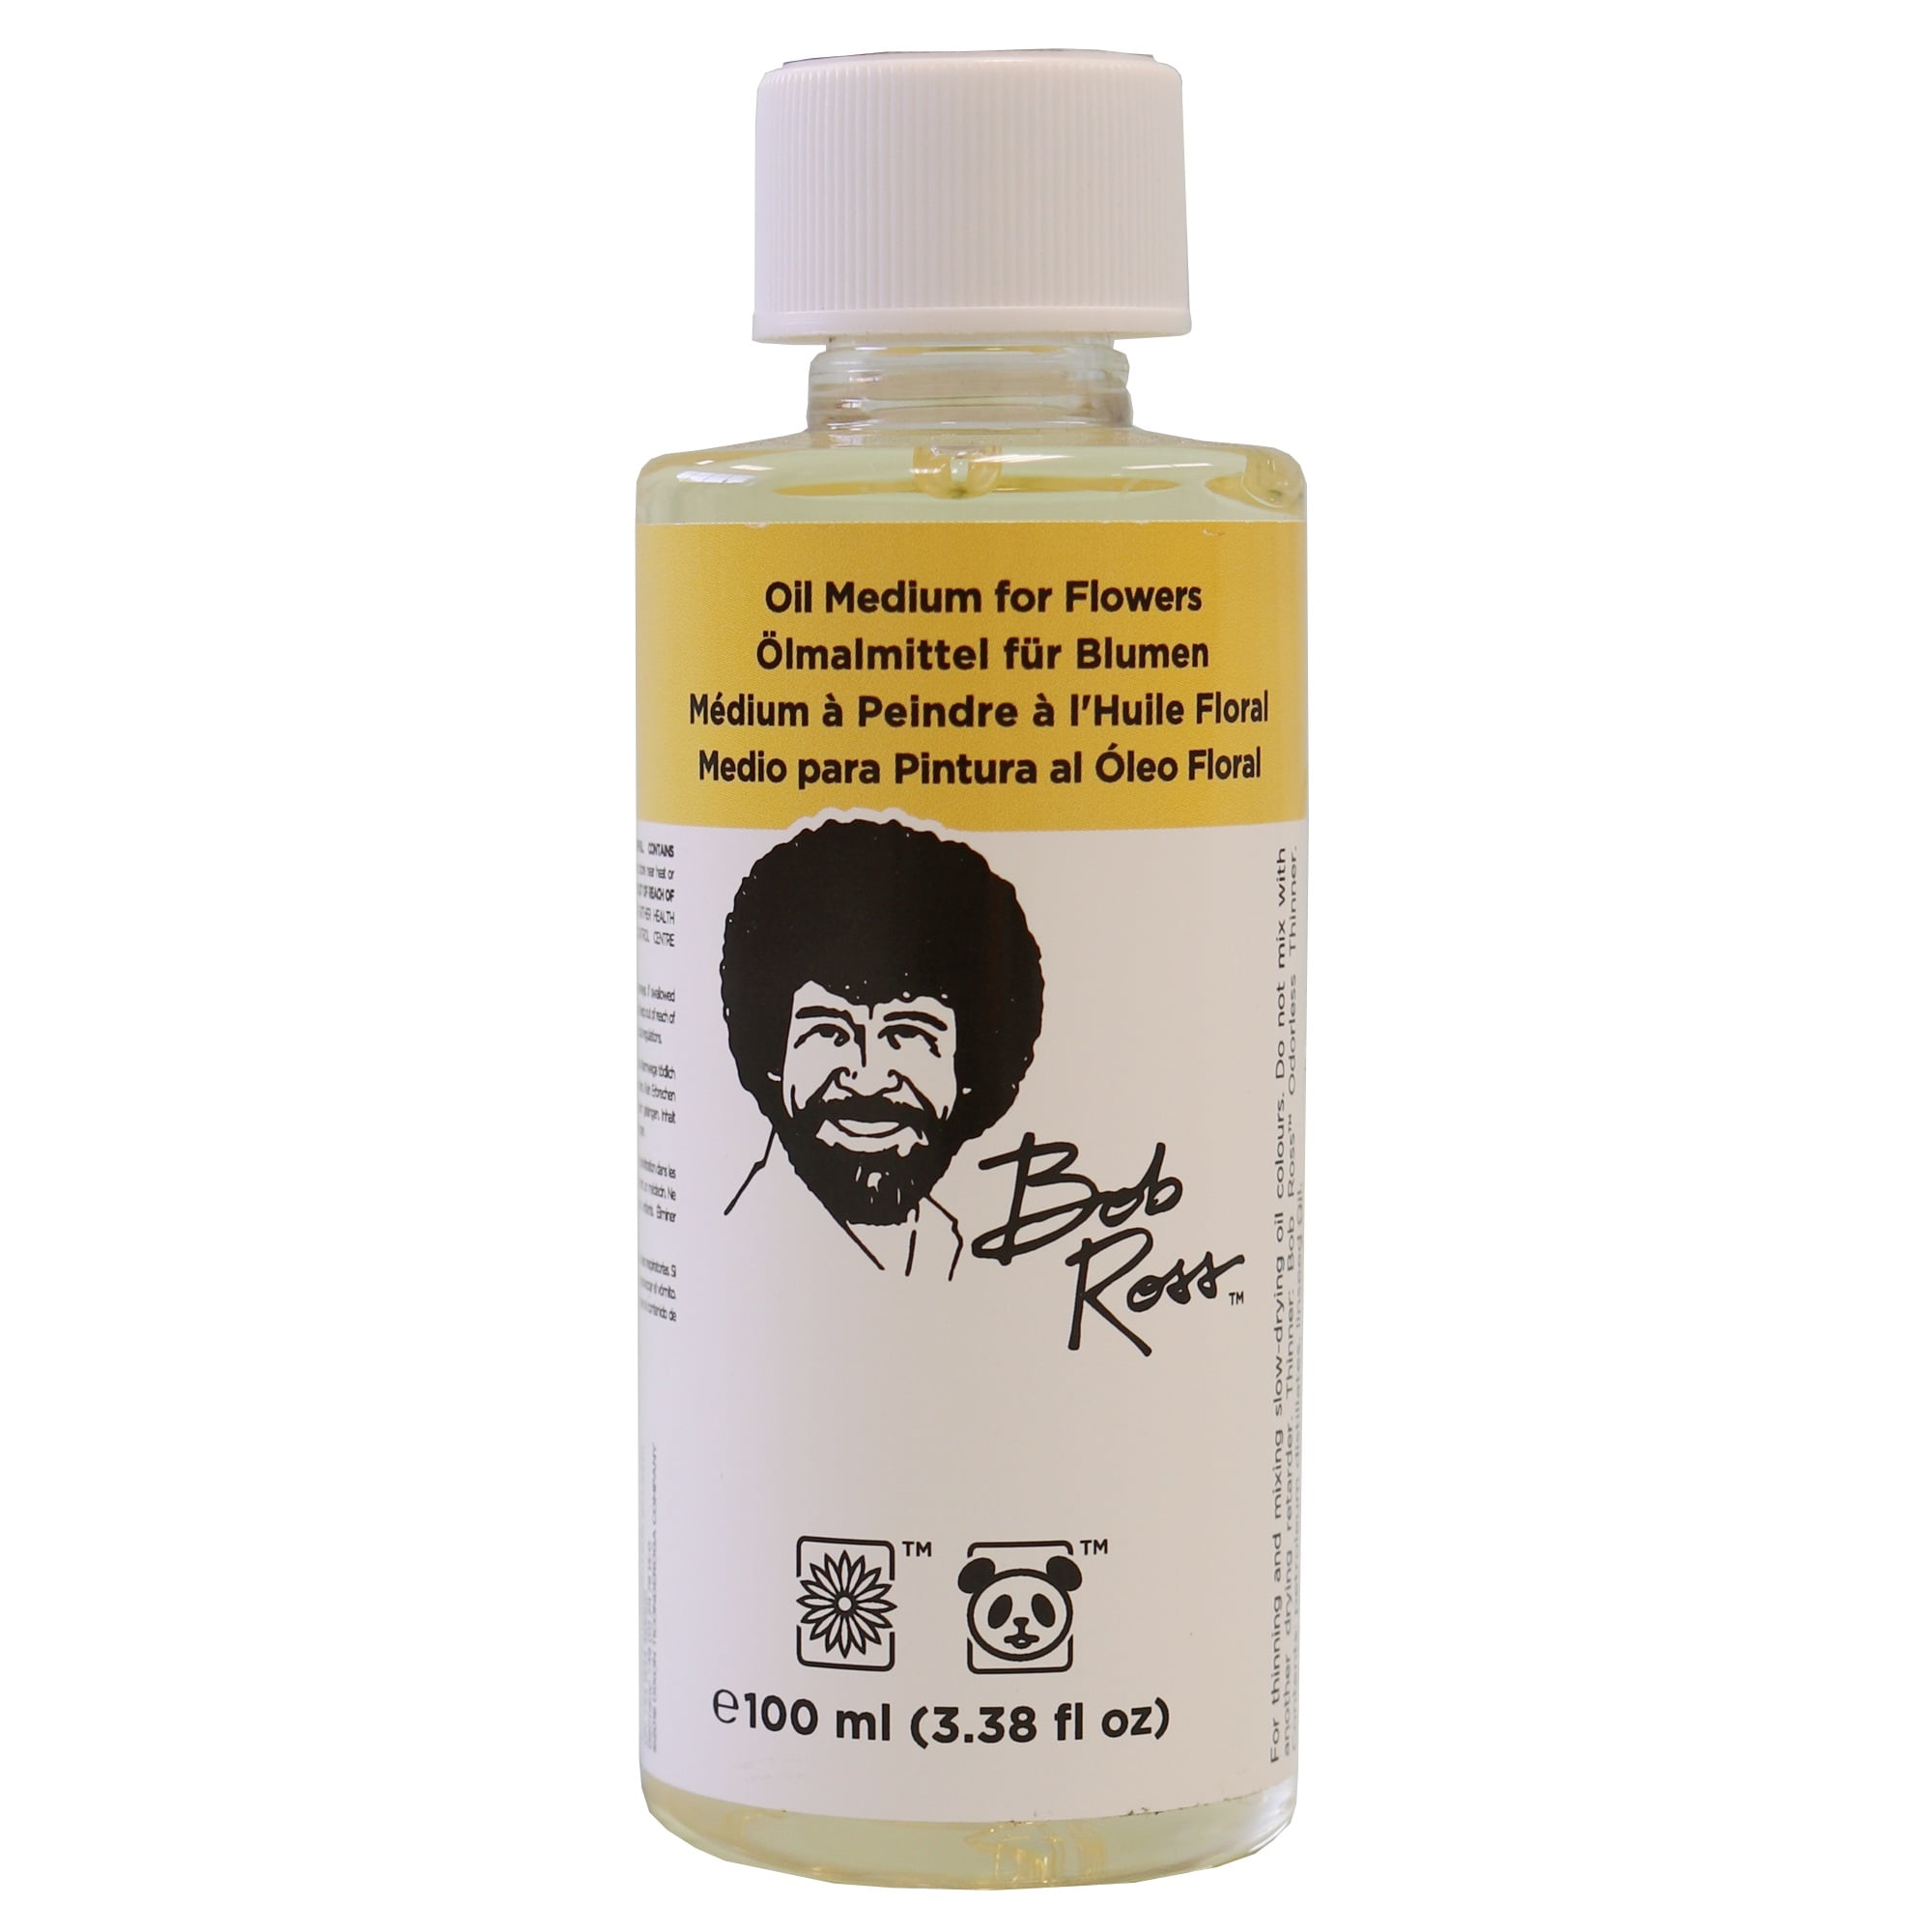 My easy paint thinner clean-up routine for Bob Ross oil painting